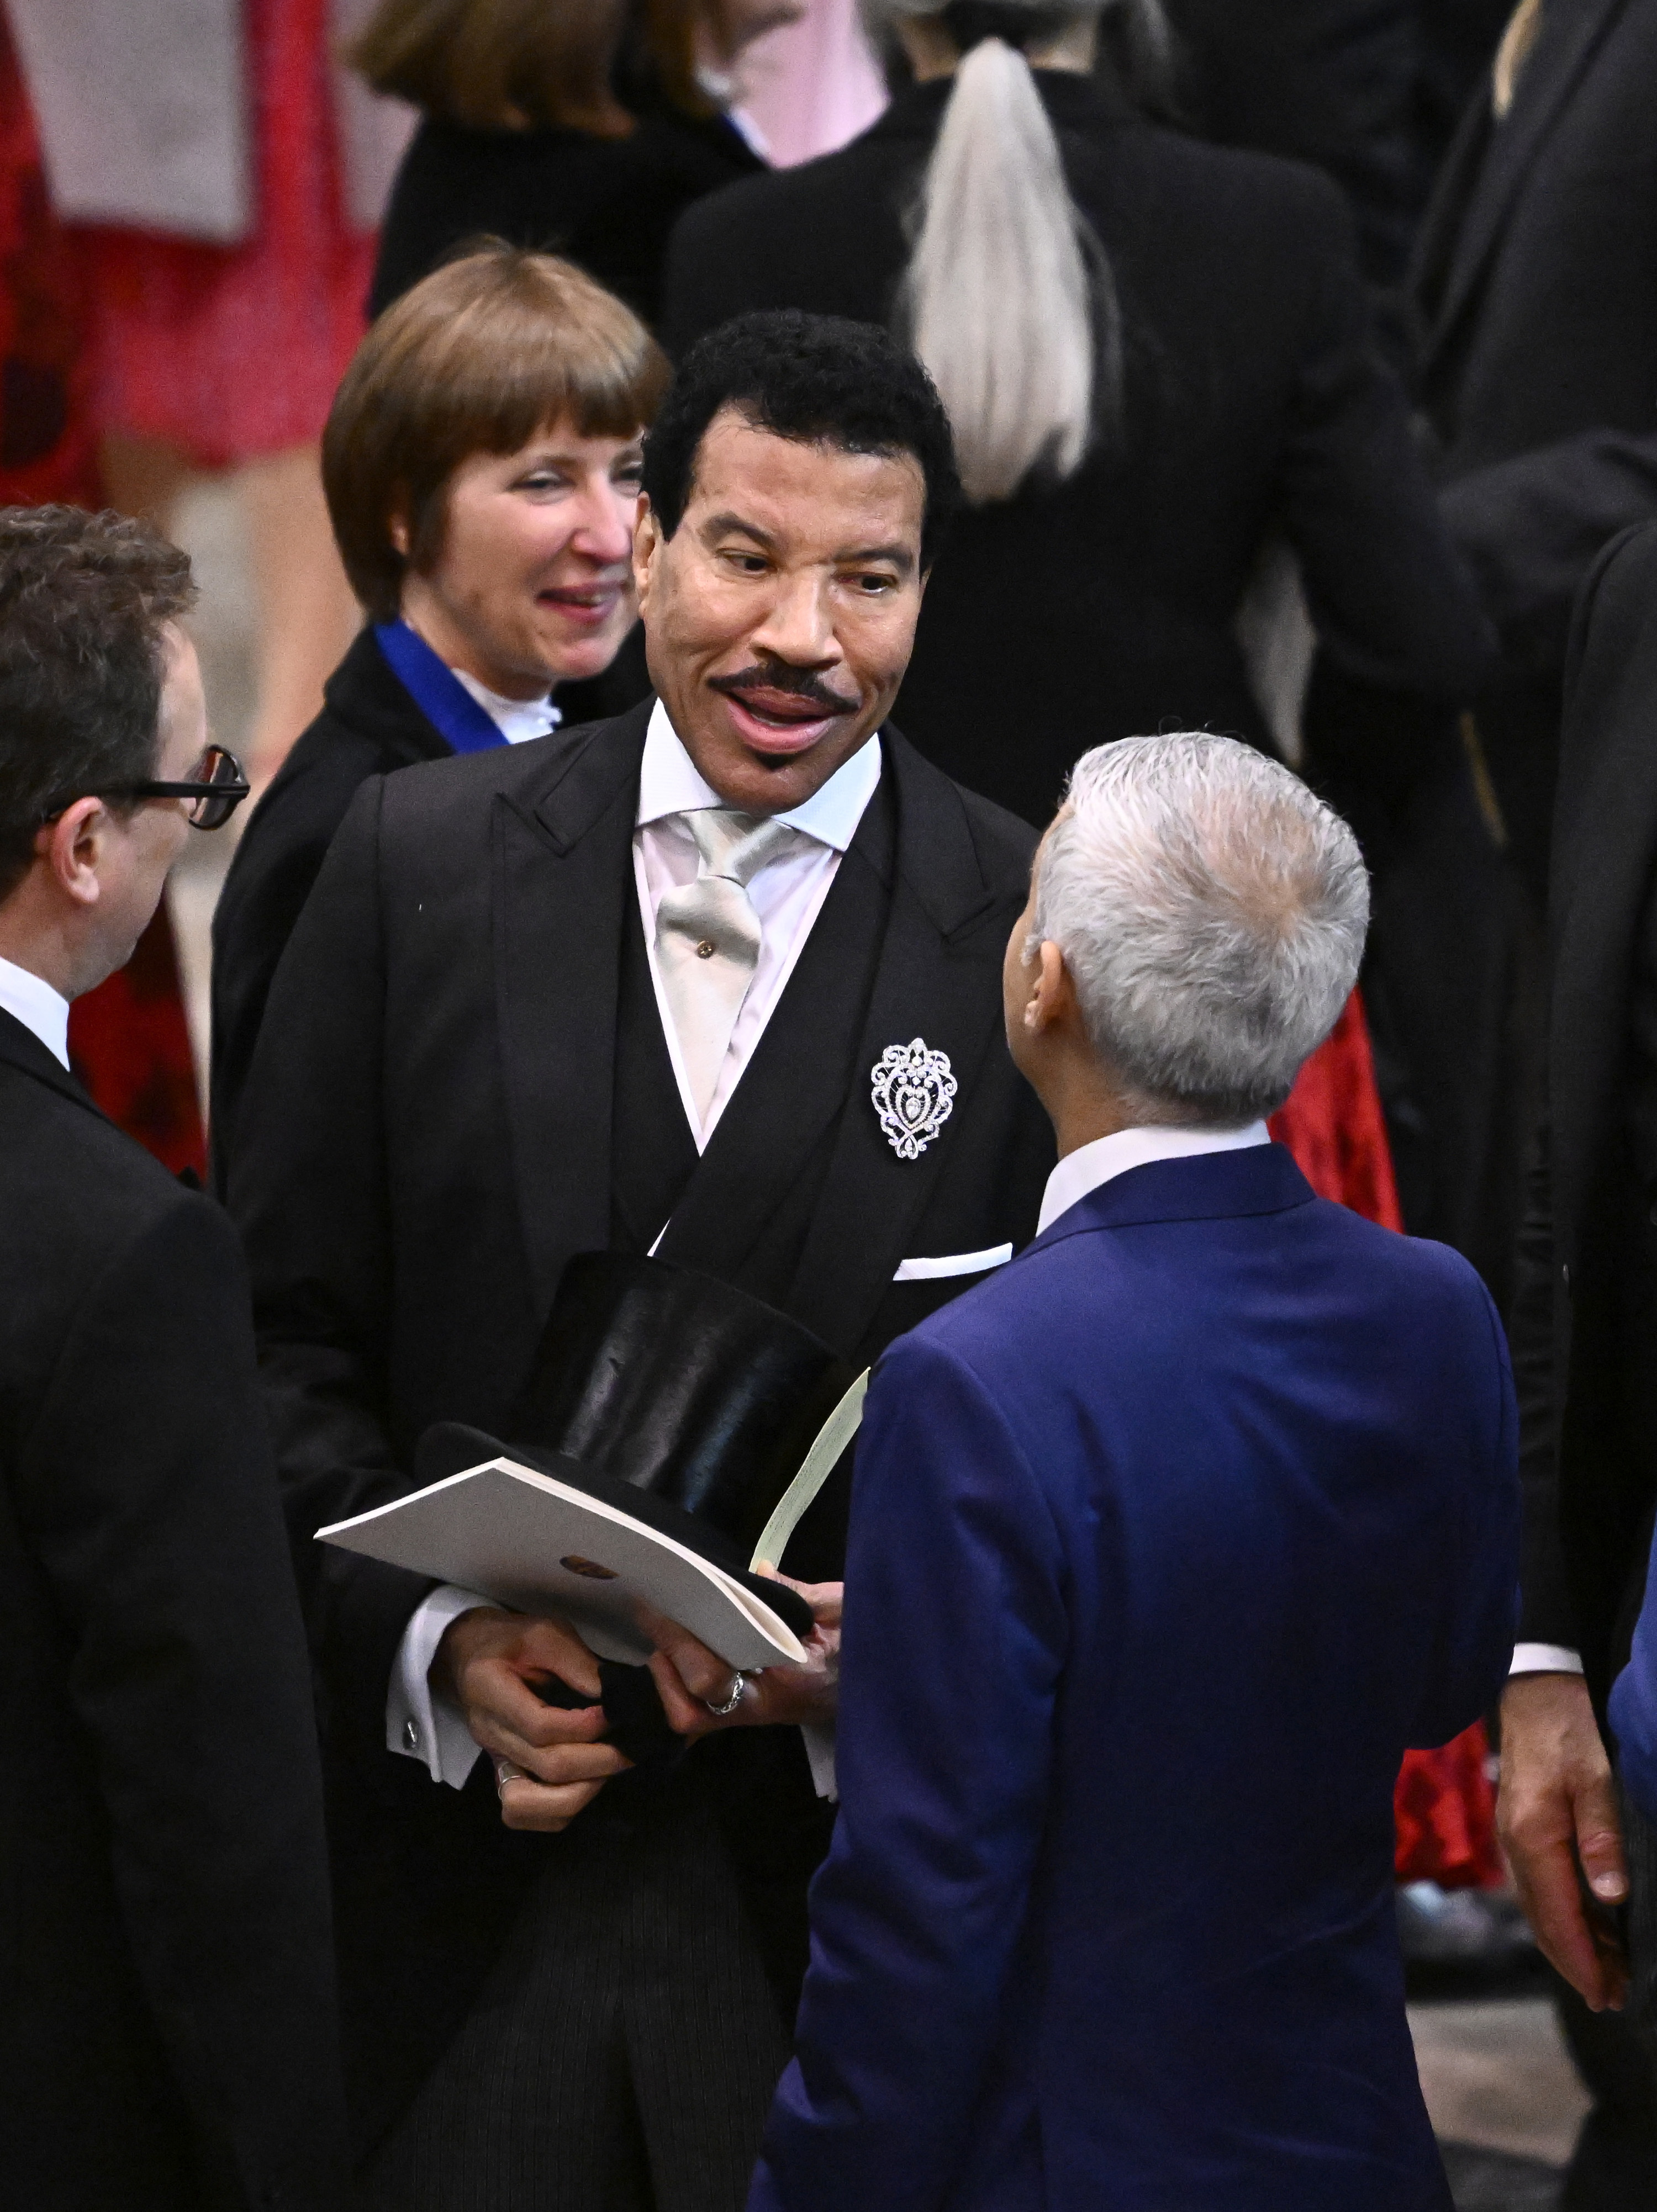 lionel richie in the crowd